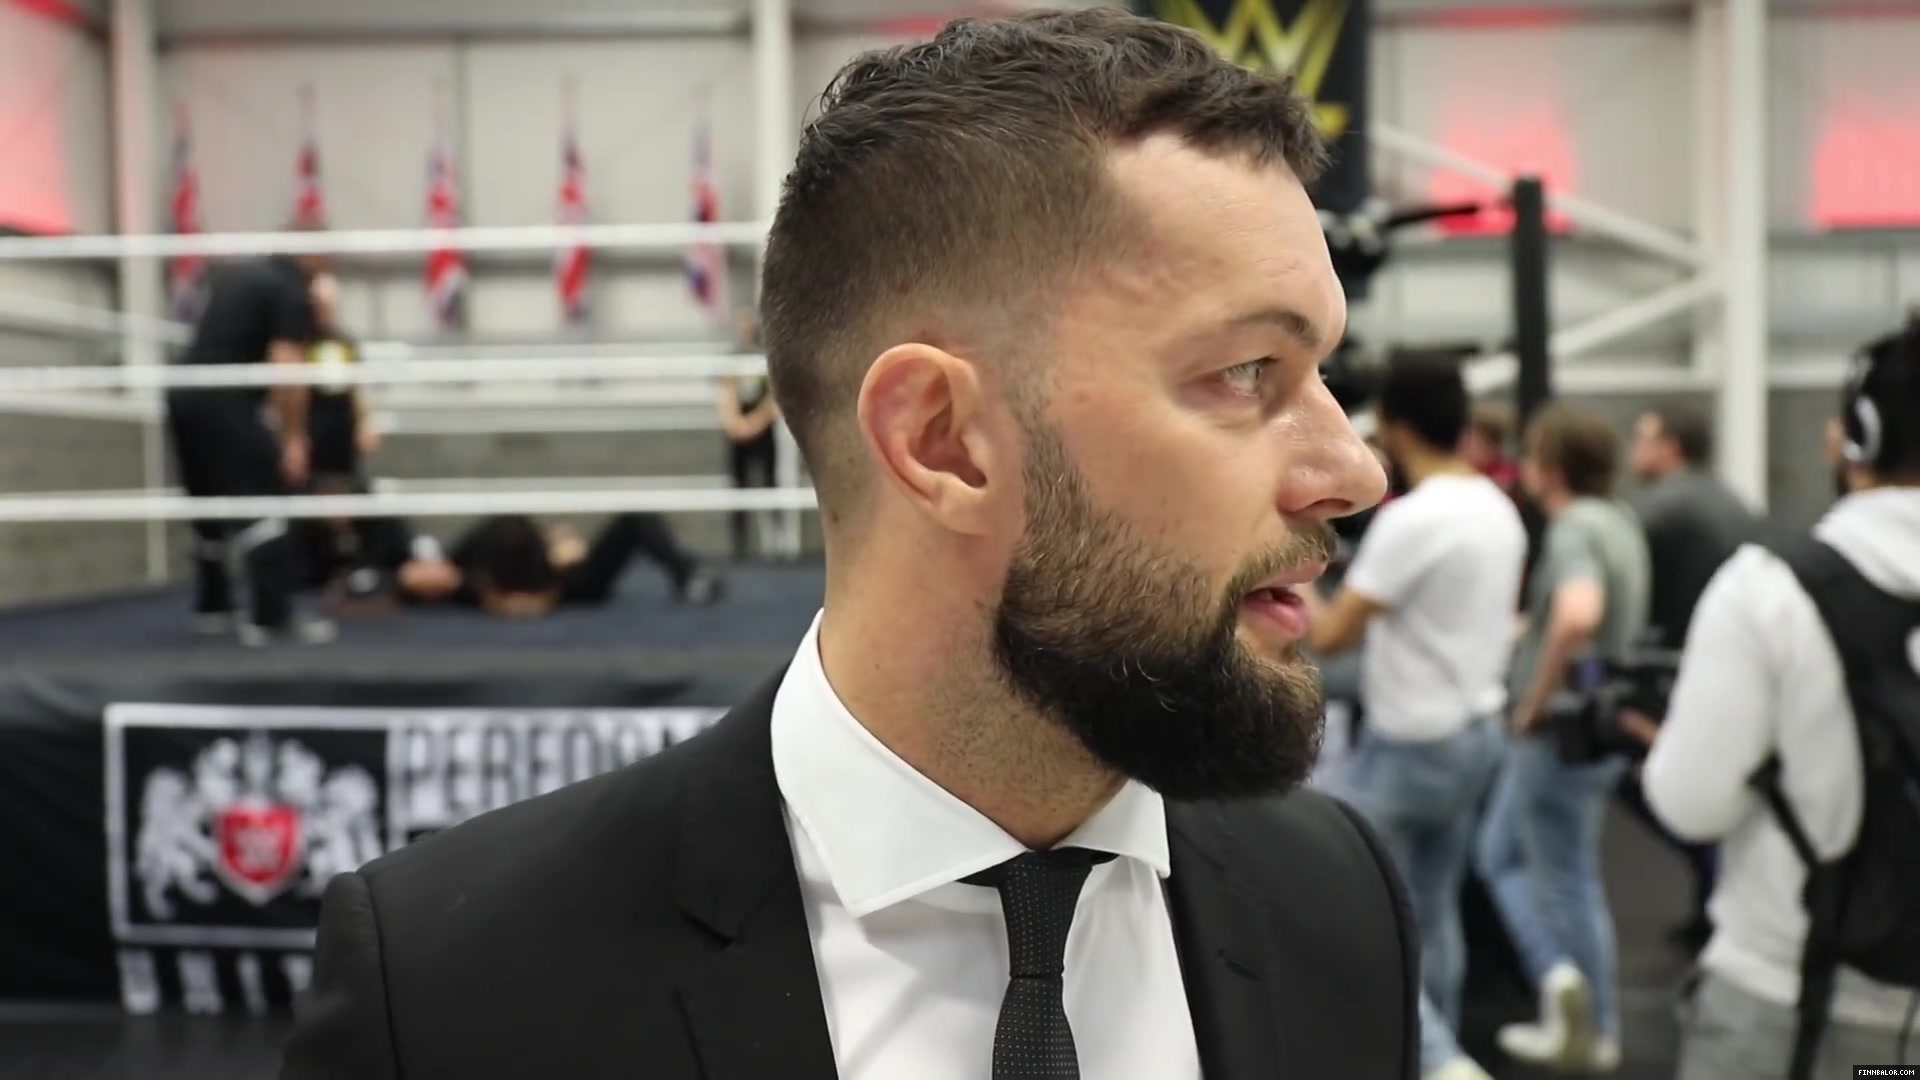 WWE_Superstar_FINN_BALOR_joins_MOUSTACHE_MOUNTAIN_at_the_opening_of_the_NXT_UK_PC_146.jpg